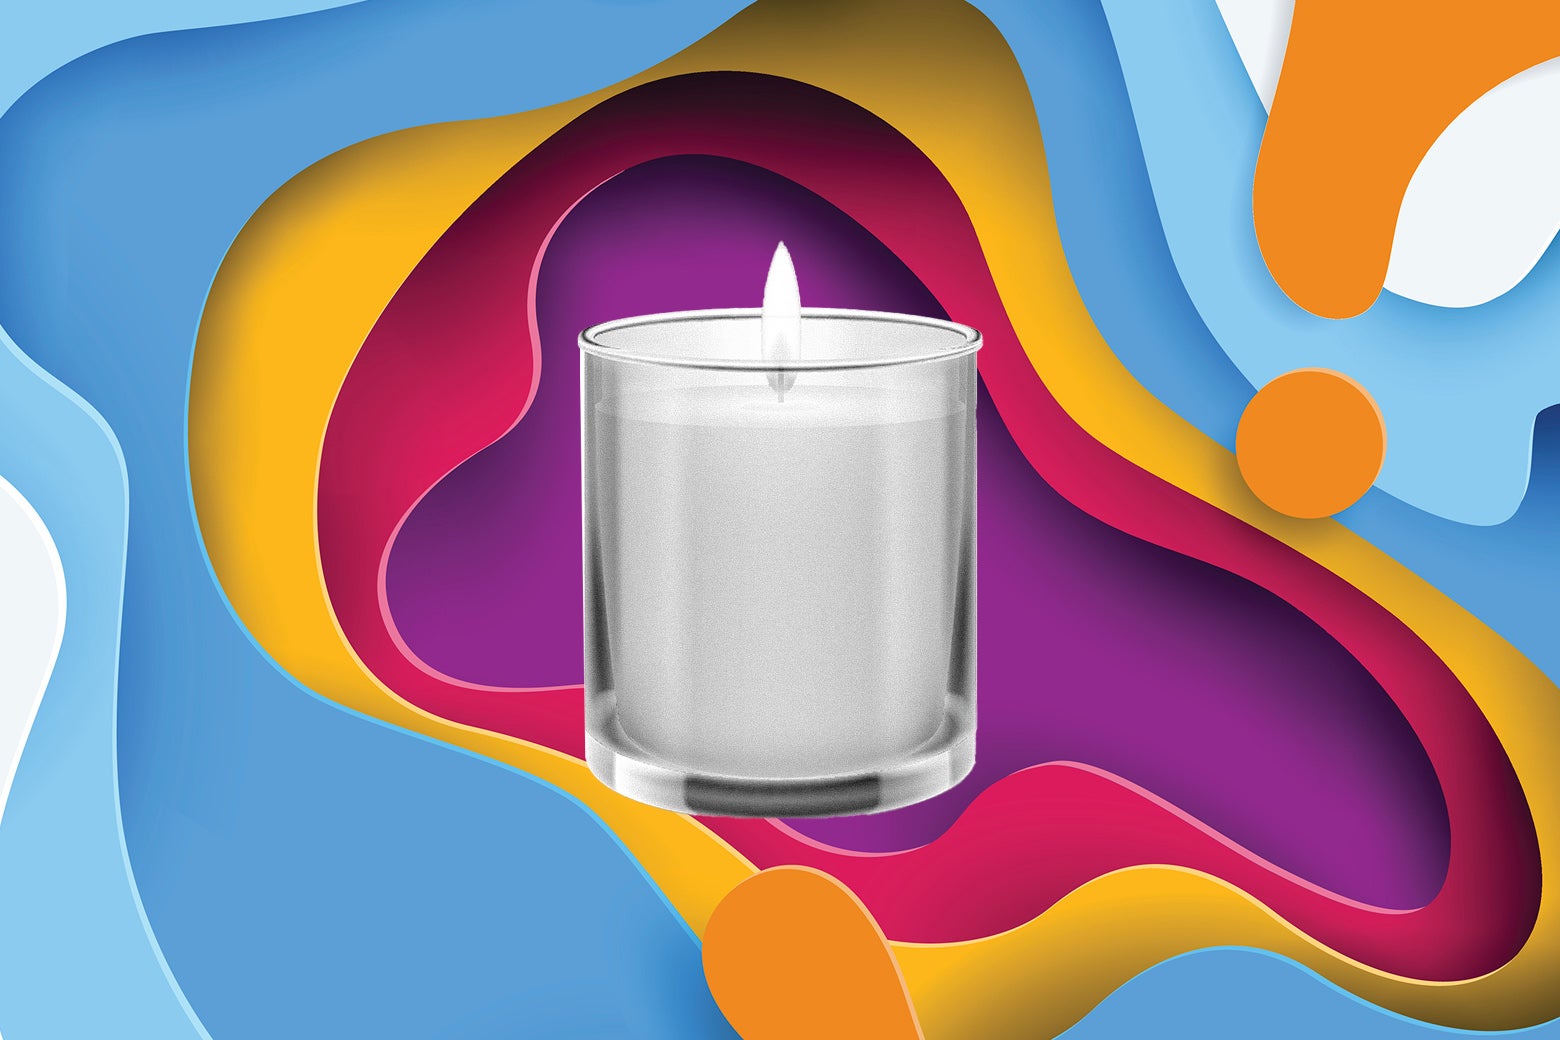 A candle with a medium-size flame.